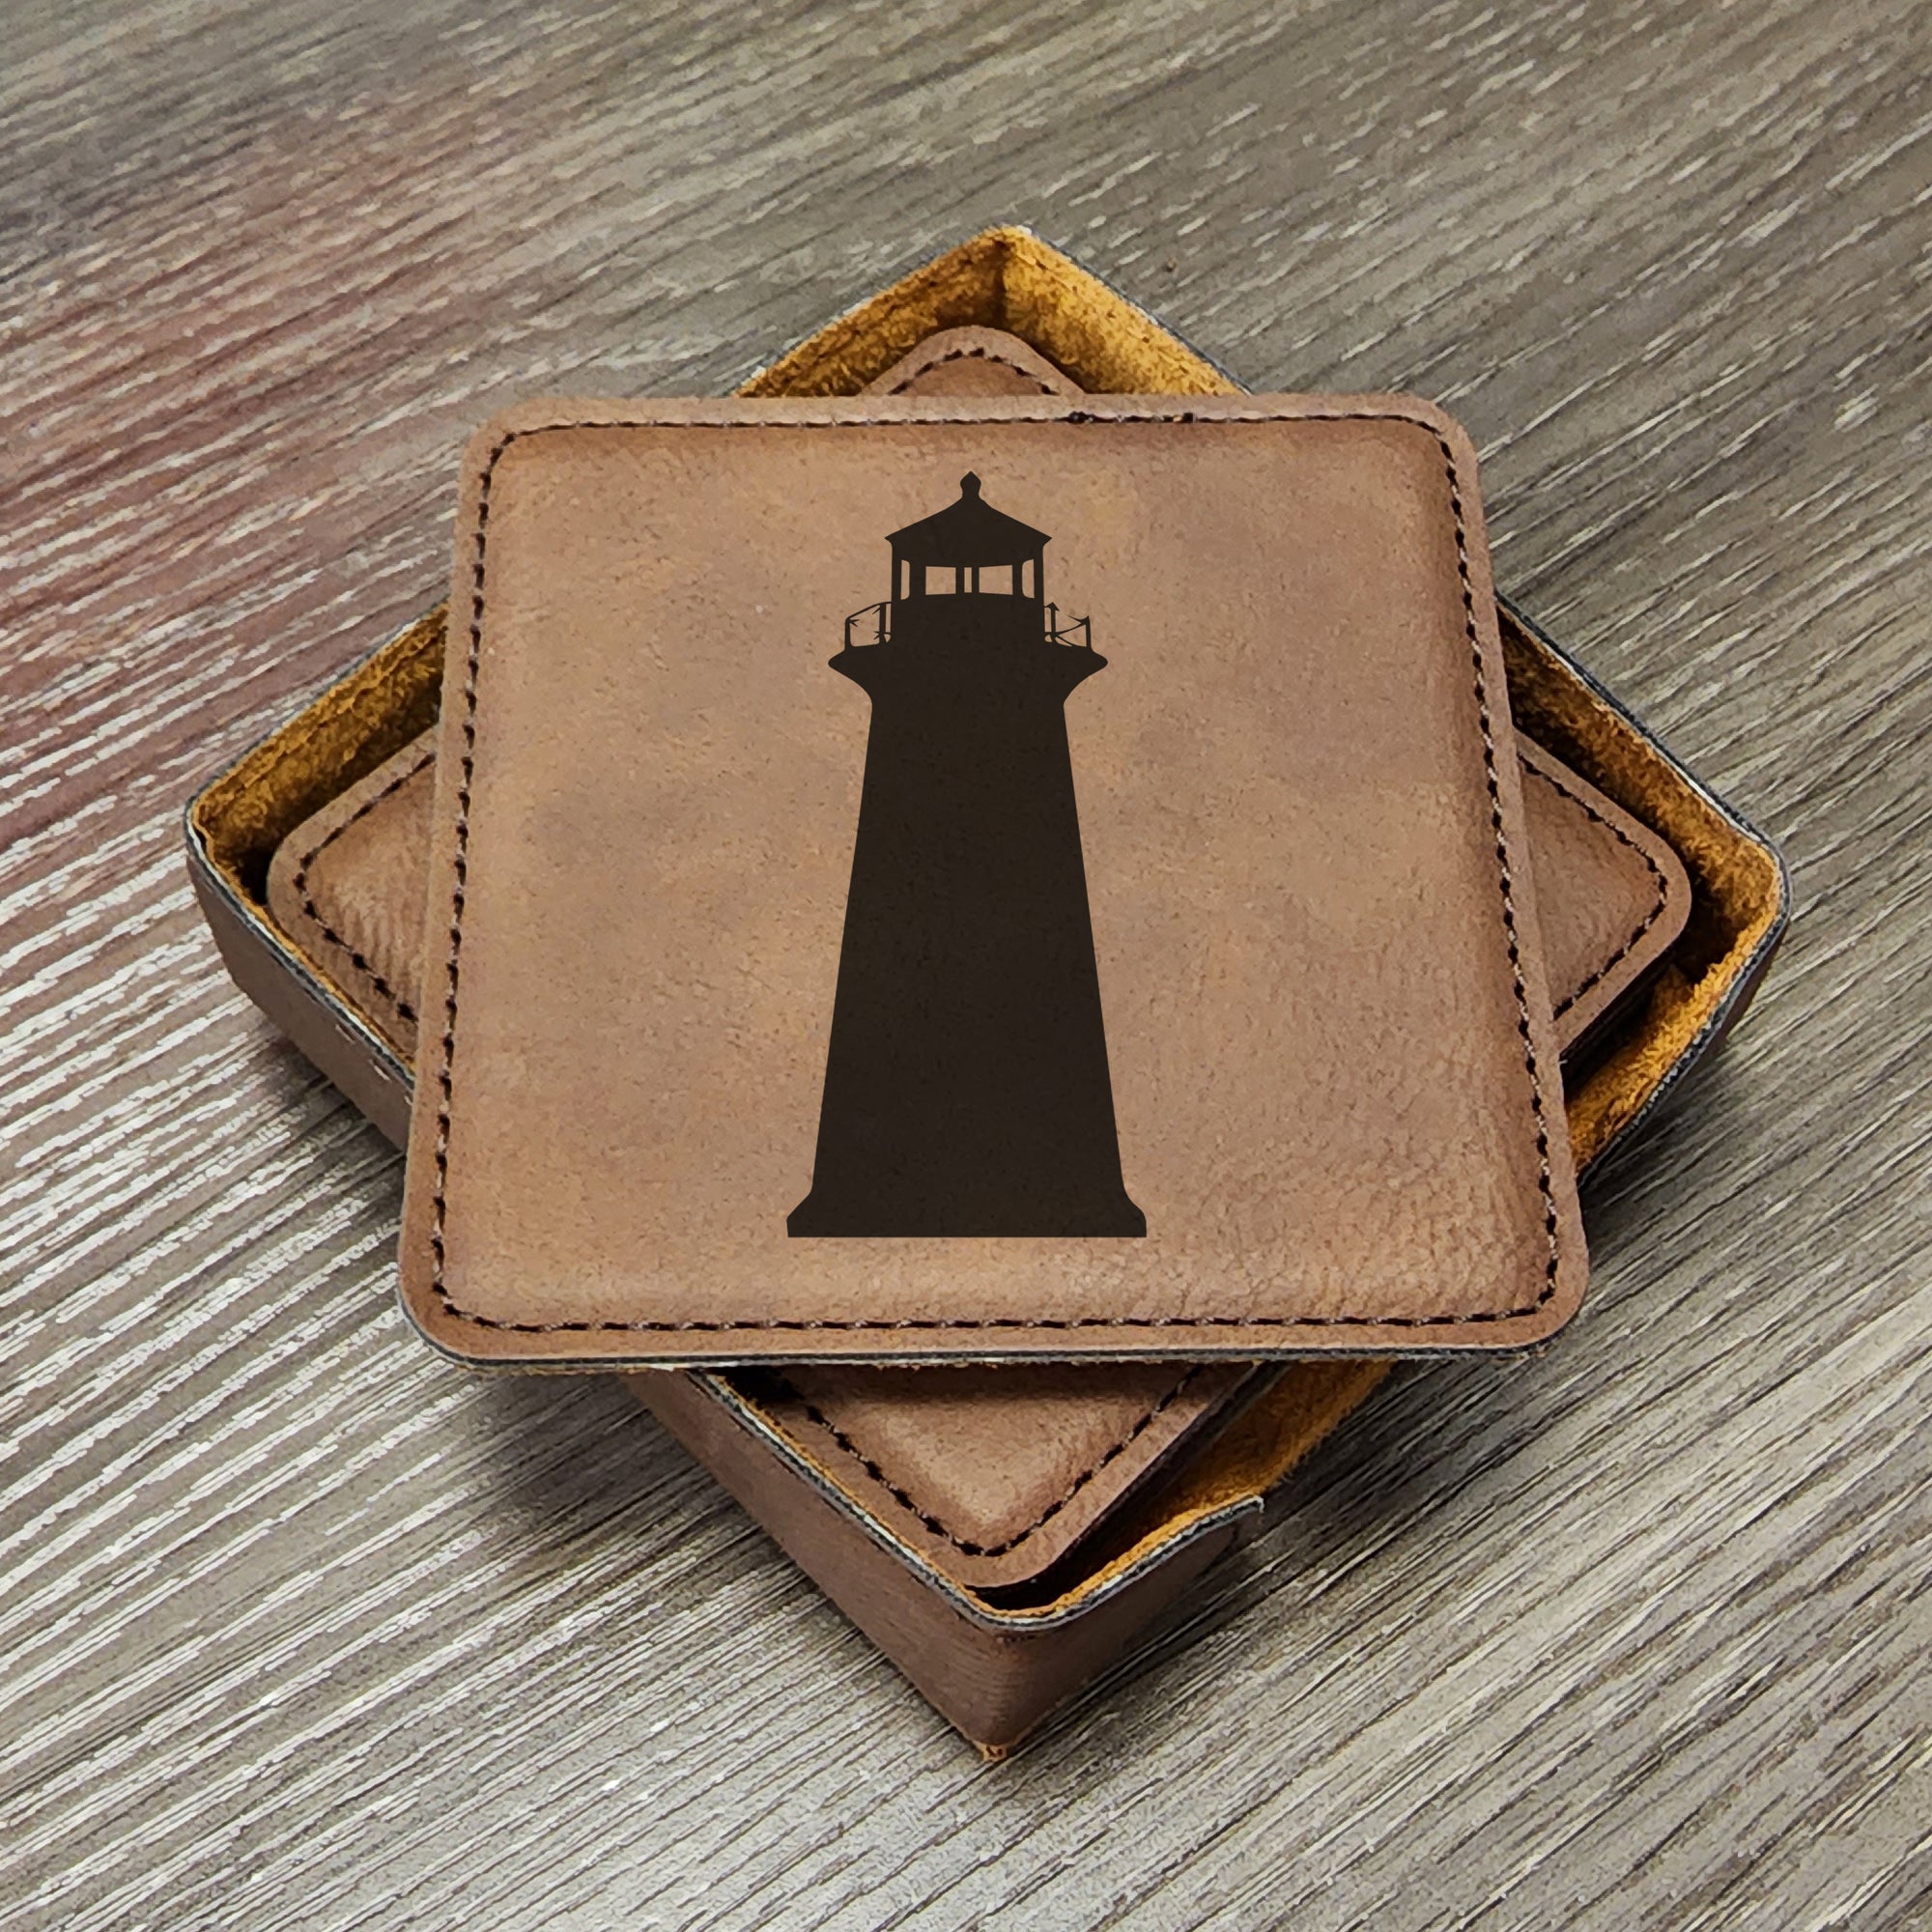 Nautical Lighthouse Coasters, Sailing Gifts, Boating Coaster, Boat Coaster, Sailing Coaster, Barware Coasters, Barroom, Set of 6 With Holder